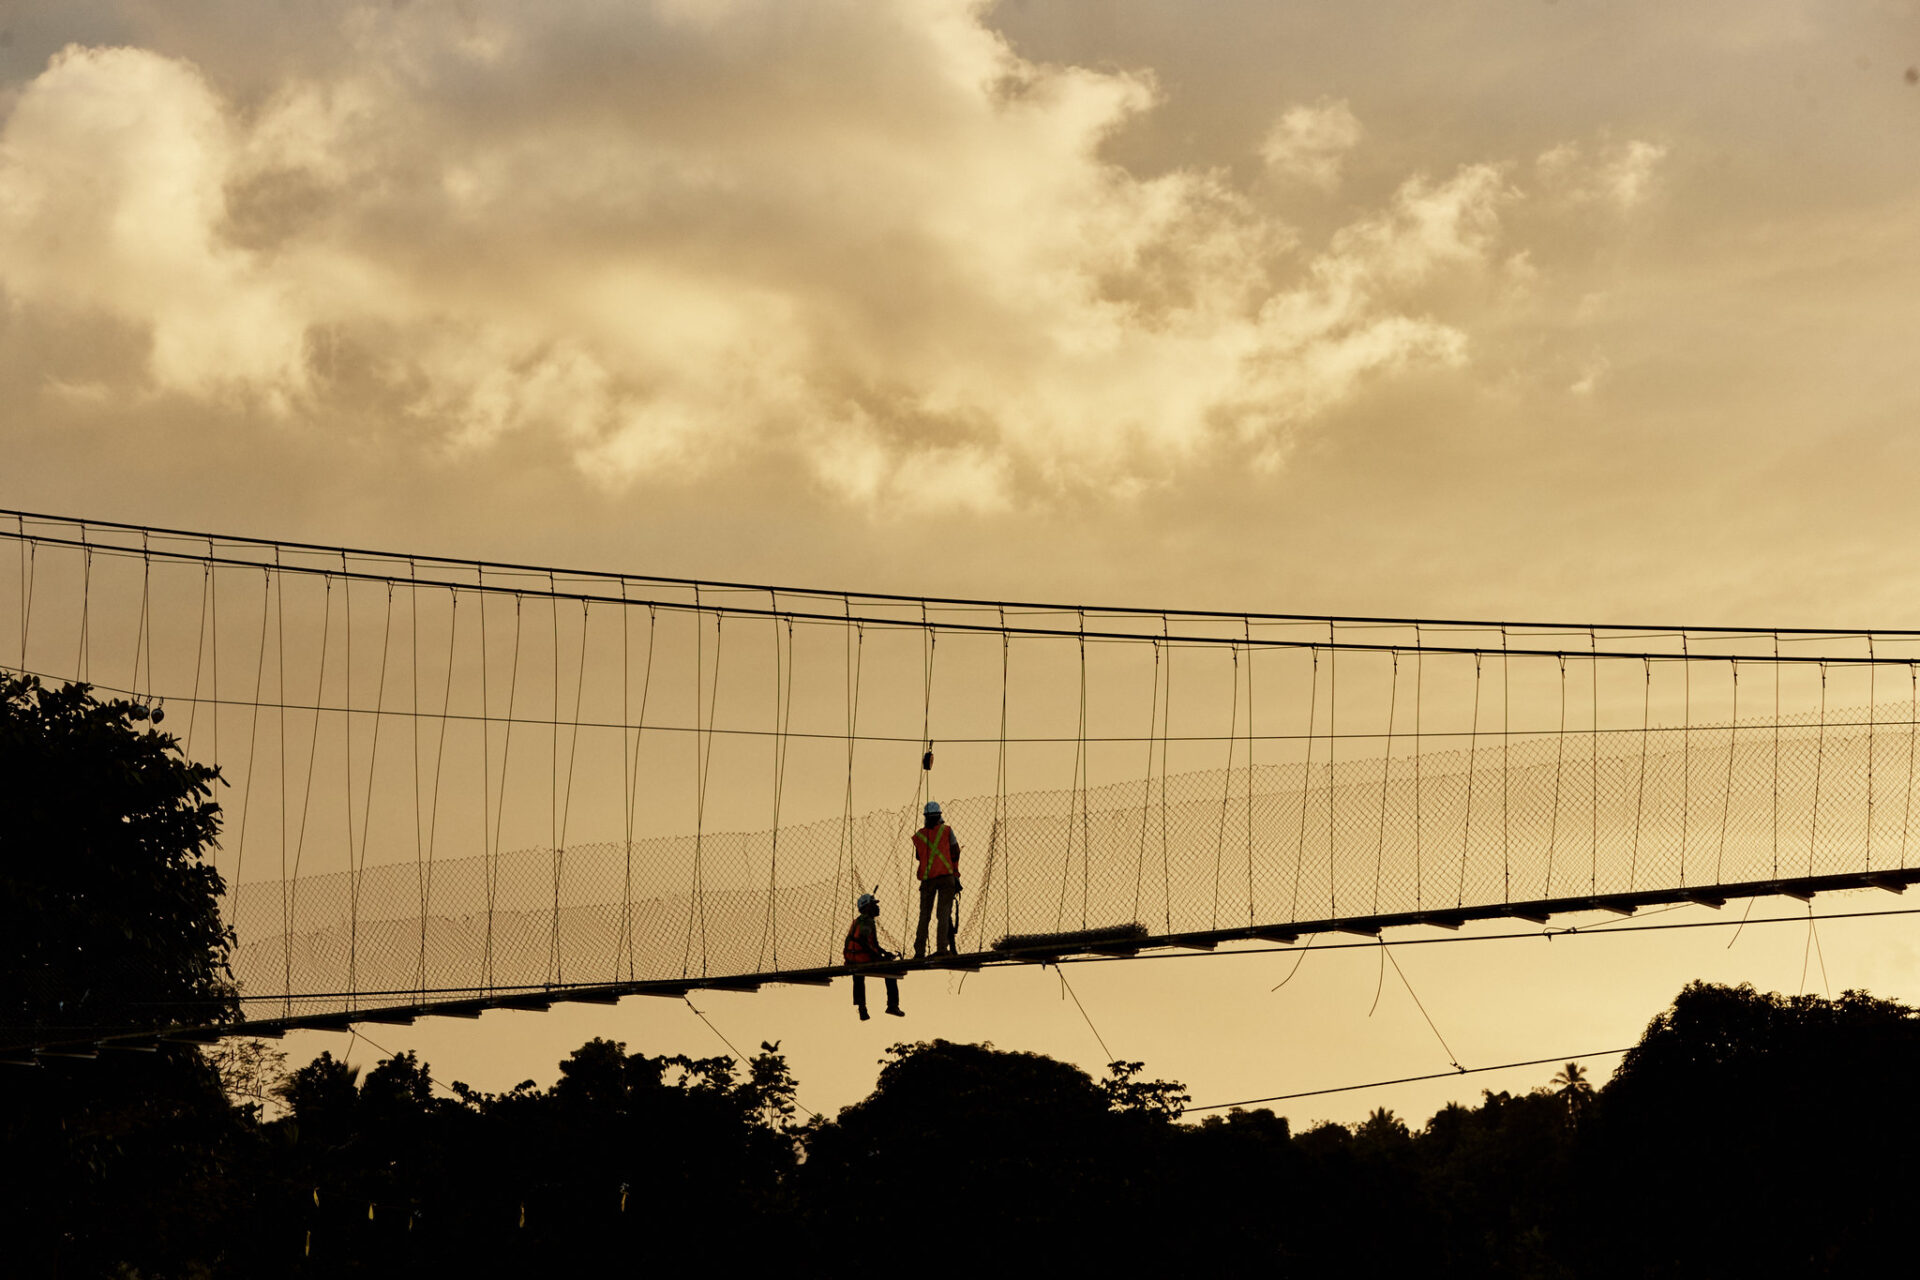 Two construction workers on a Bridges to Prosperity trailbridge—one sitting, one standing—at dusk, surrounded by trees.